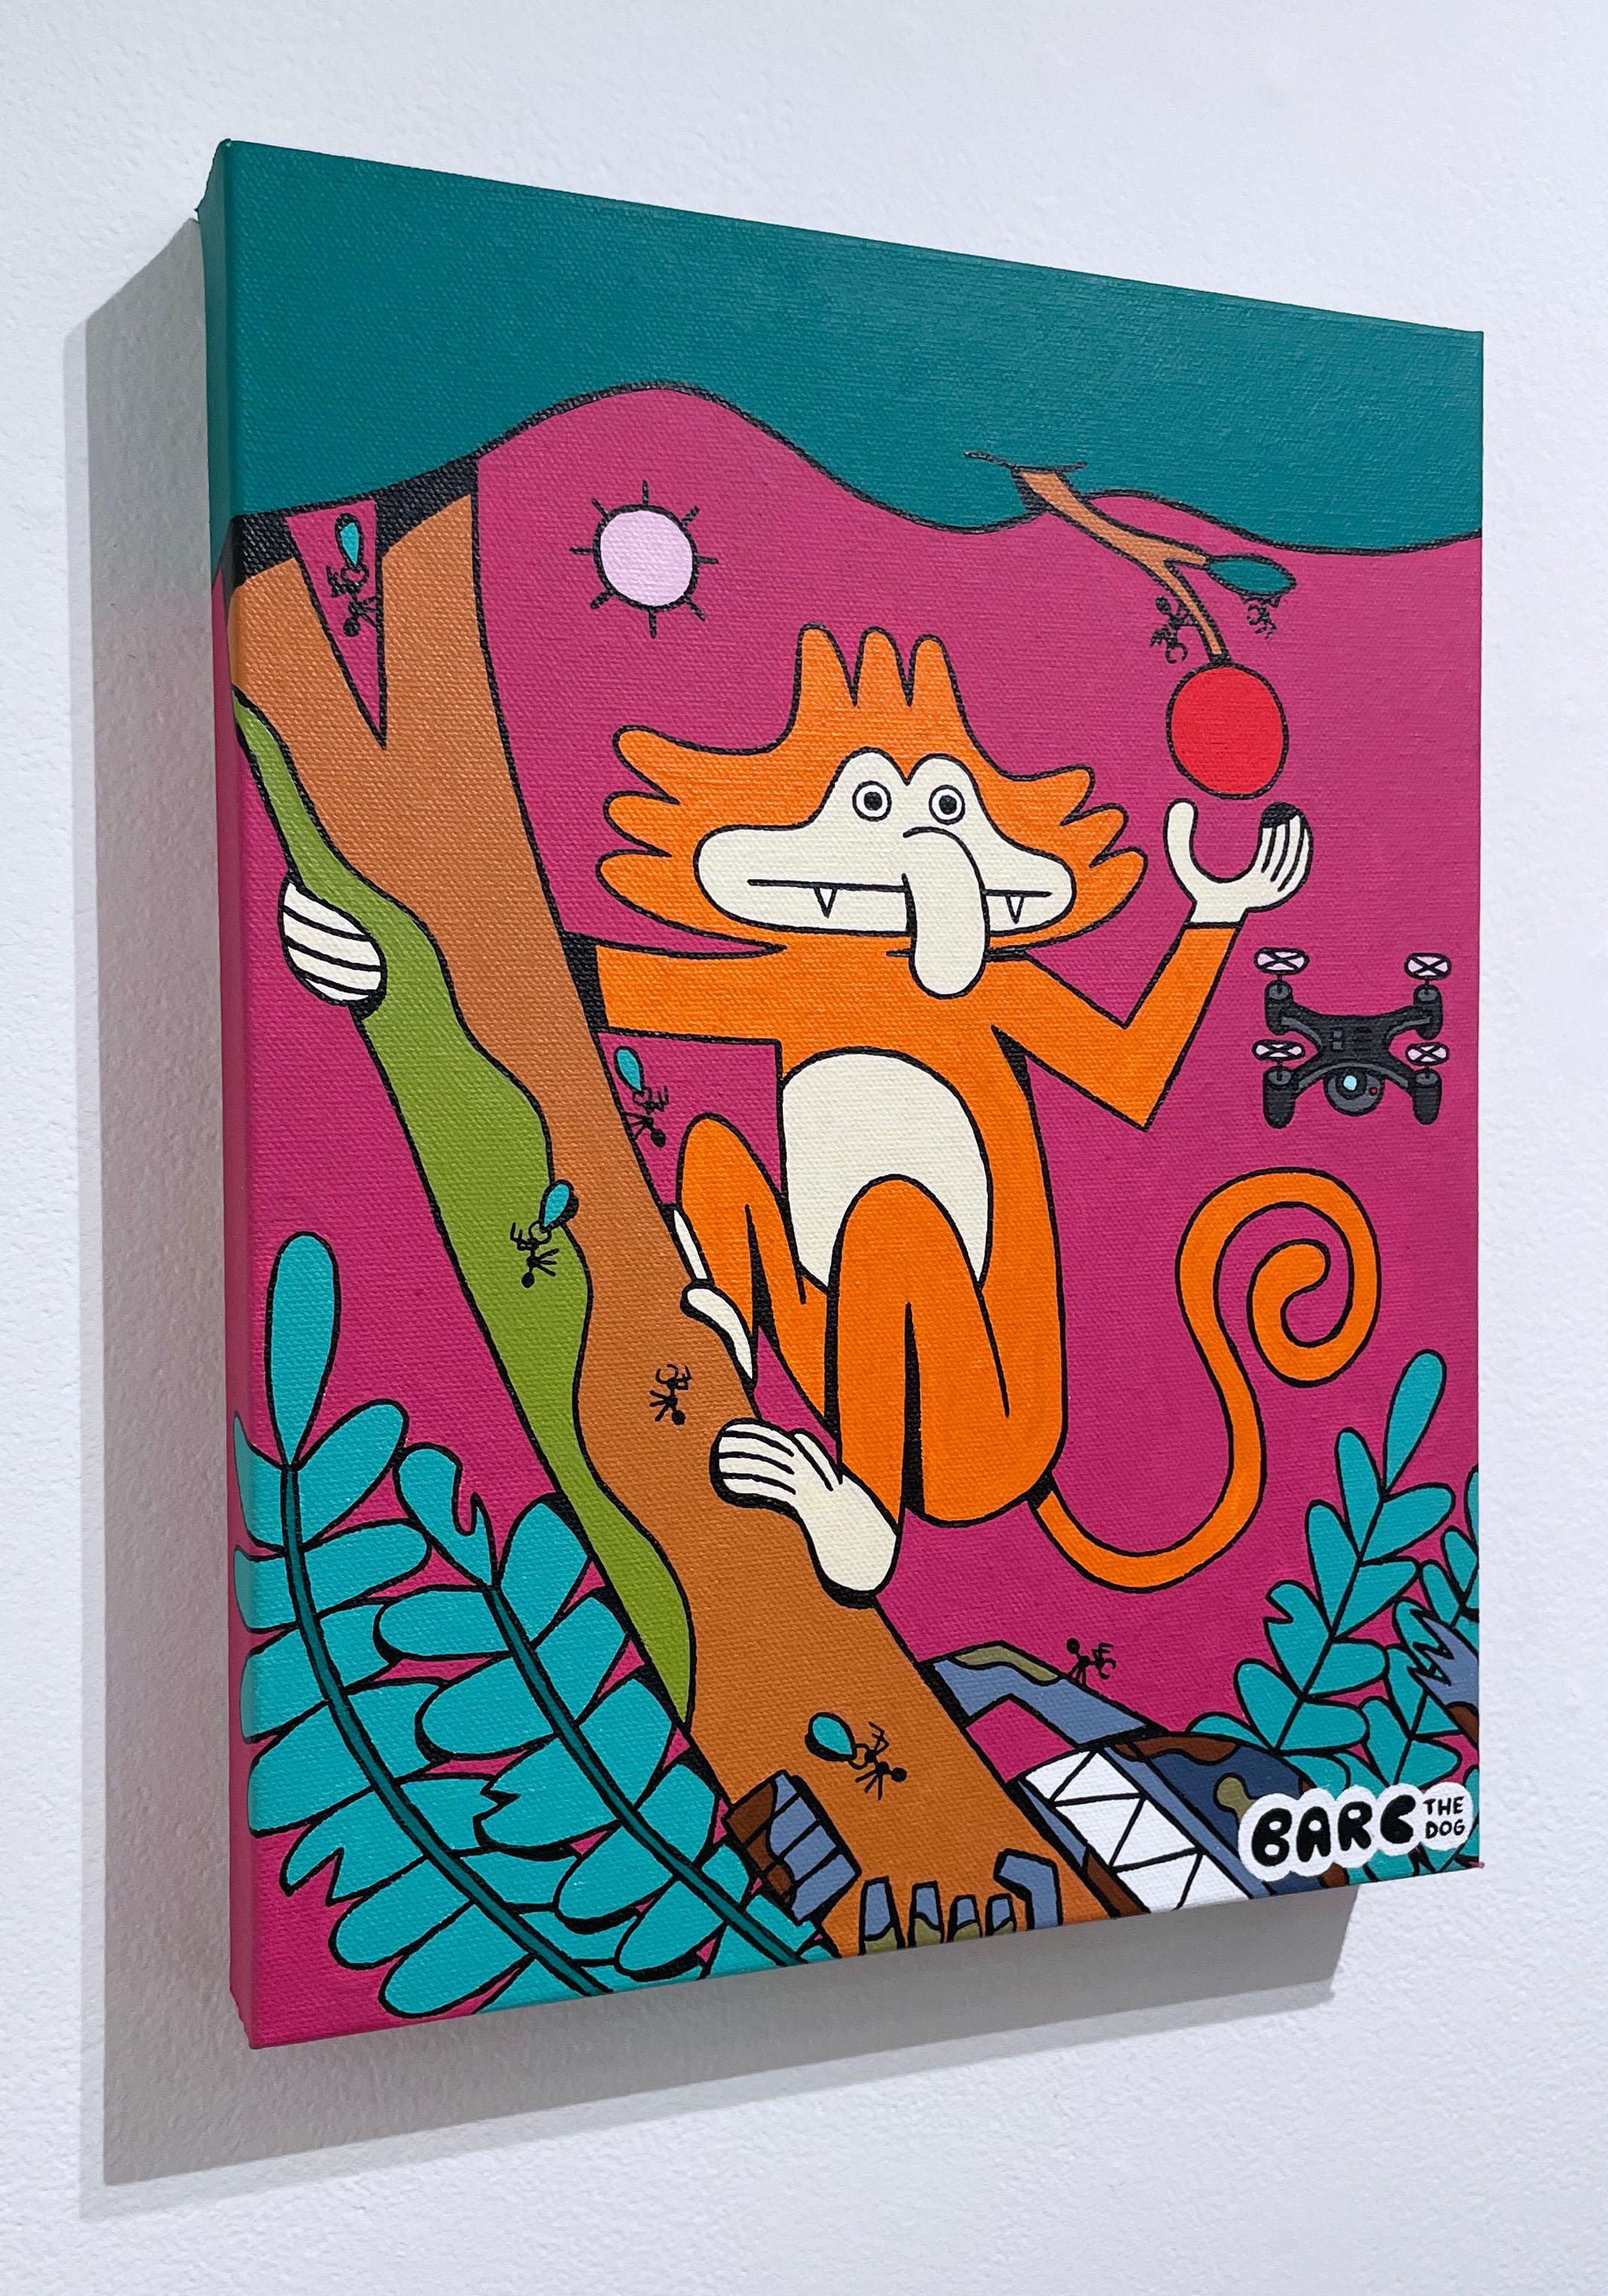 Dream Monkey by BARC the dog (2021), pop art comic book style, acrylic on canvas, illustration, cartoon inspired character art, monkey, apple tree, drone, foliage, jungle

Welcome to the world BARC the dog. In this vignette, BARC is at the bottom